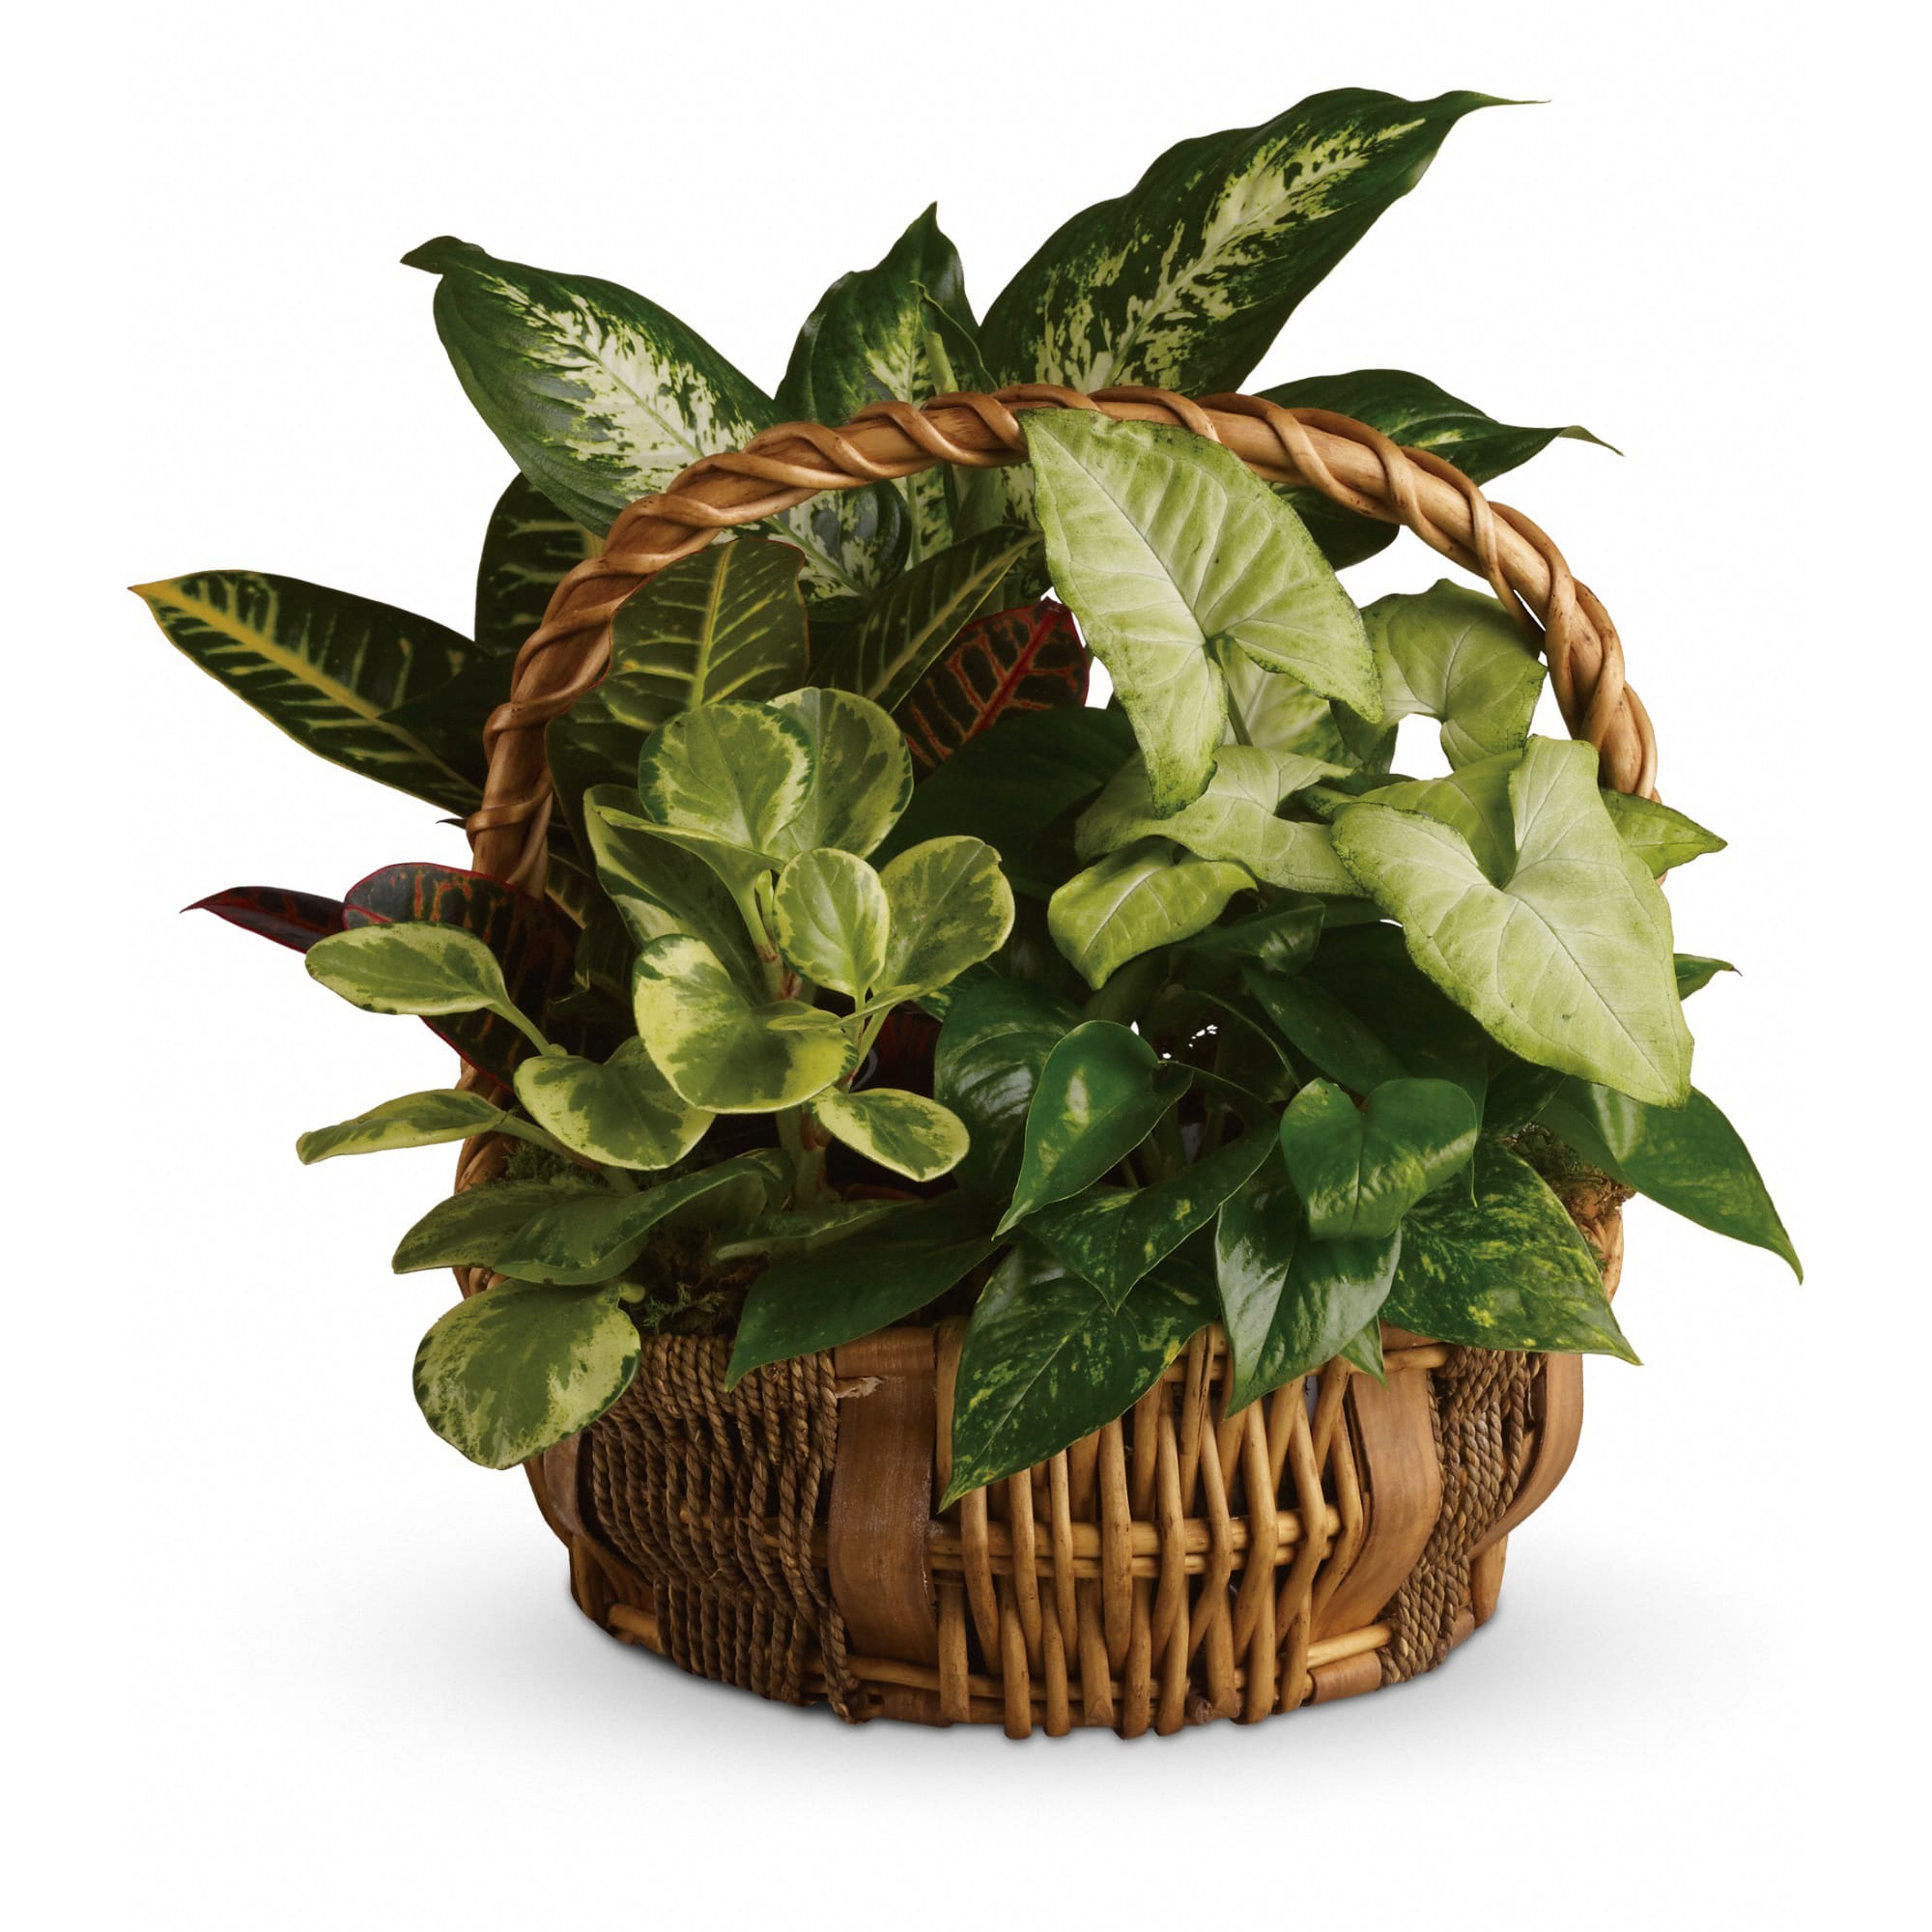 Emerald Garden Basket - You don't have to follow the yellow brick road to find this emerald jewel. All kinds of gorgeous greens fill this basket that makes a perfect gift for men or women. Celebration or sympathy. Birthday or any day. So beautiful and bountiful it will deliver any message eloquently.    Pothos, nephthytis, dieffenbachia, croton and peperomia plants are perfectly arranged in a distinctive willow rope basket. When it comes to gifts, this one is a gem!    Approximately 17 1/2&quot; W x 17 1/4&quot; H    Orientation: All-Around    As Shown : T106-1A